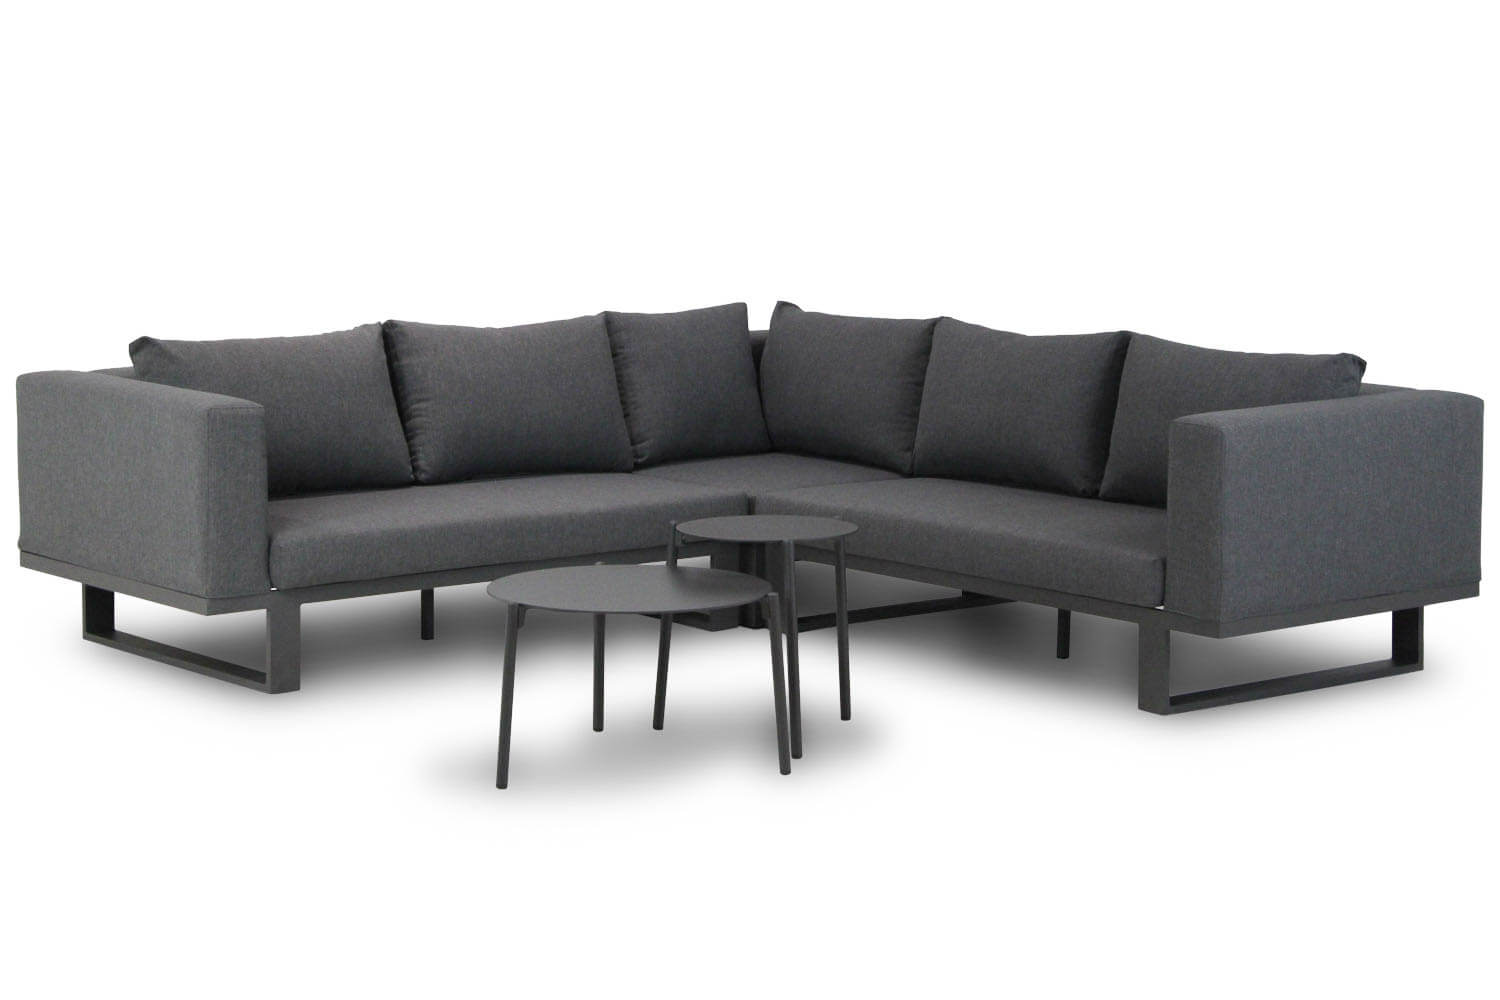 coco club loungeset stof pacific 45 60 cm - Lifestyle Club/Pacific 45/60 cm hoek loungeset 5-delig